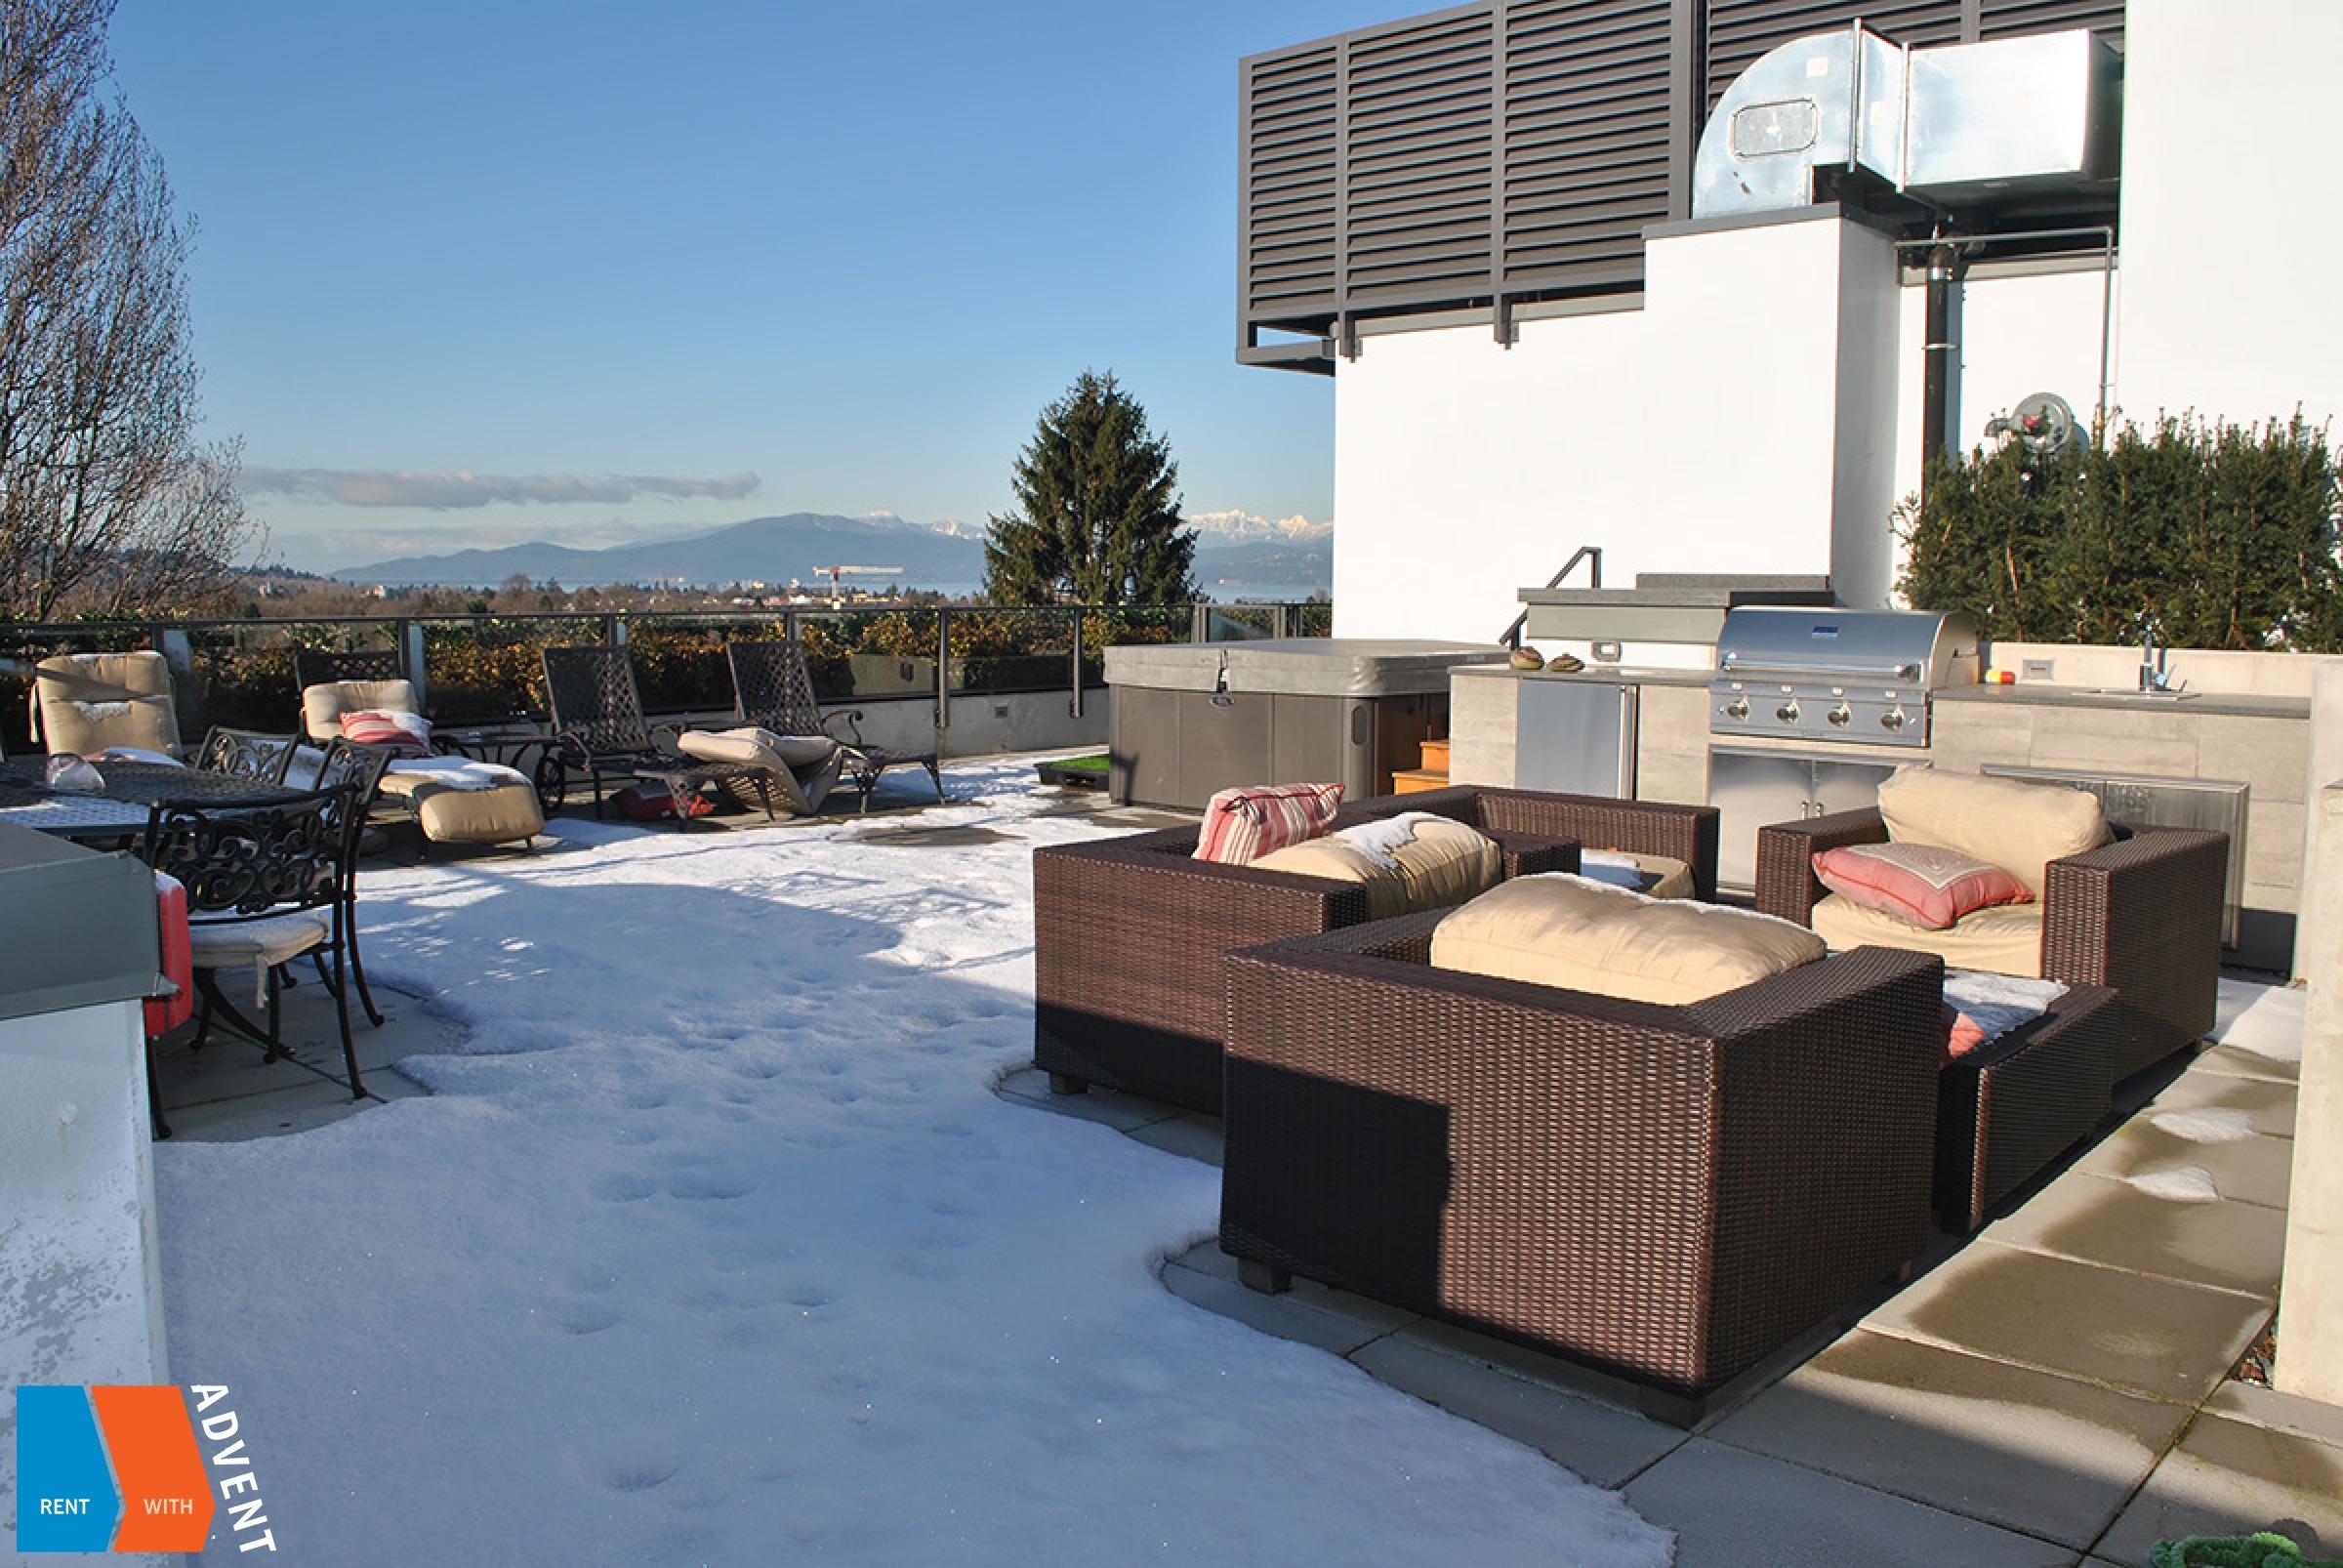 Luxury Penthouse Rental at Arbutus Ridge in Vancouver's Westside. 510 - 2118 West 15th Avenue, Vancouver, BC, Canada.